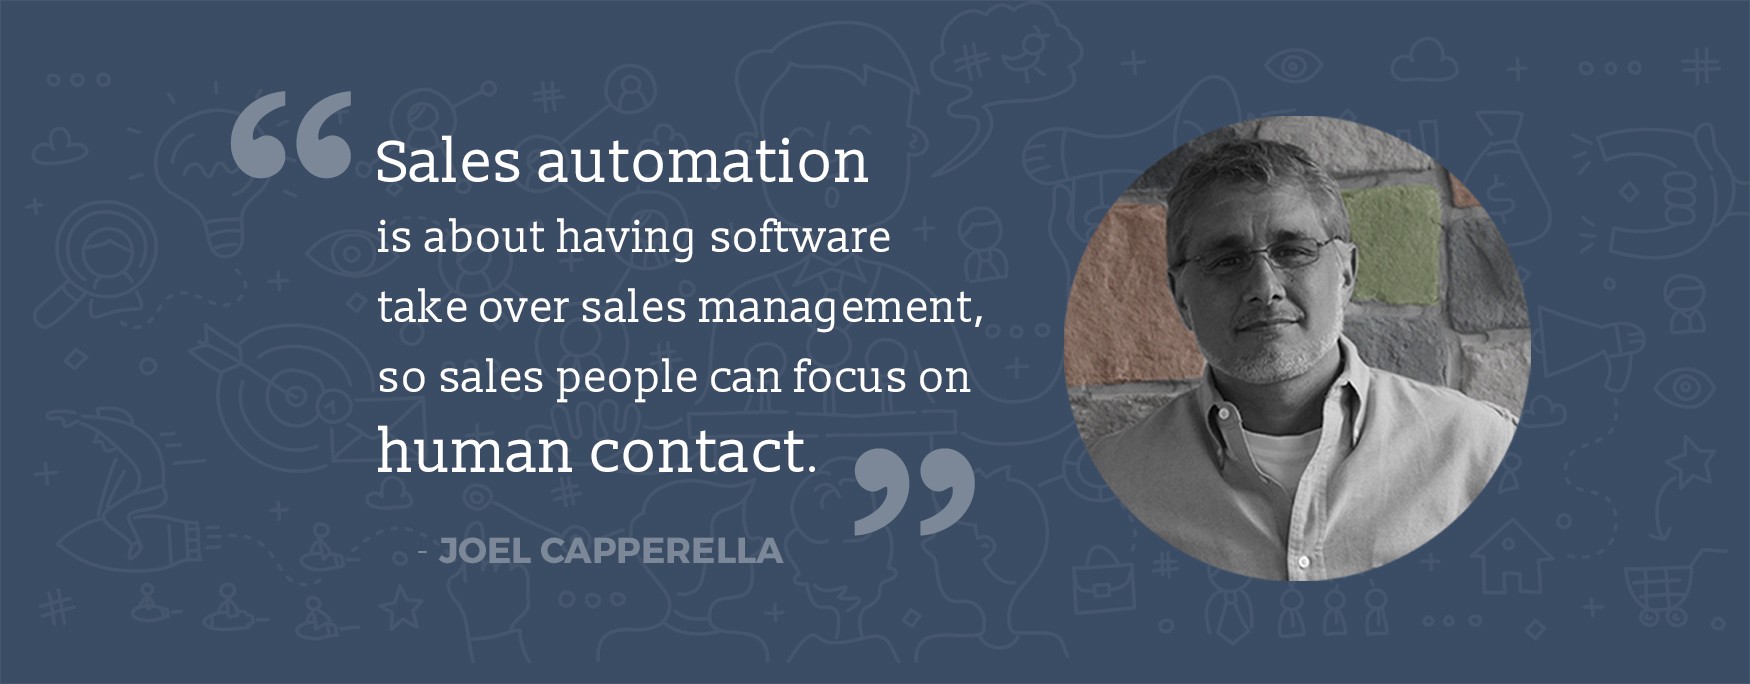 Sales automation is about having software take over sales management so sales people can focus on human contact, by Joel Capperella